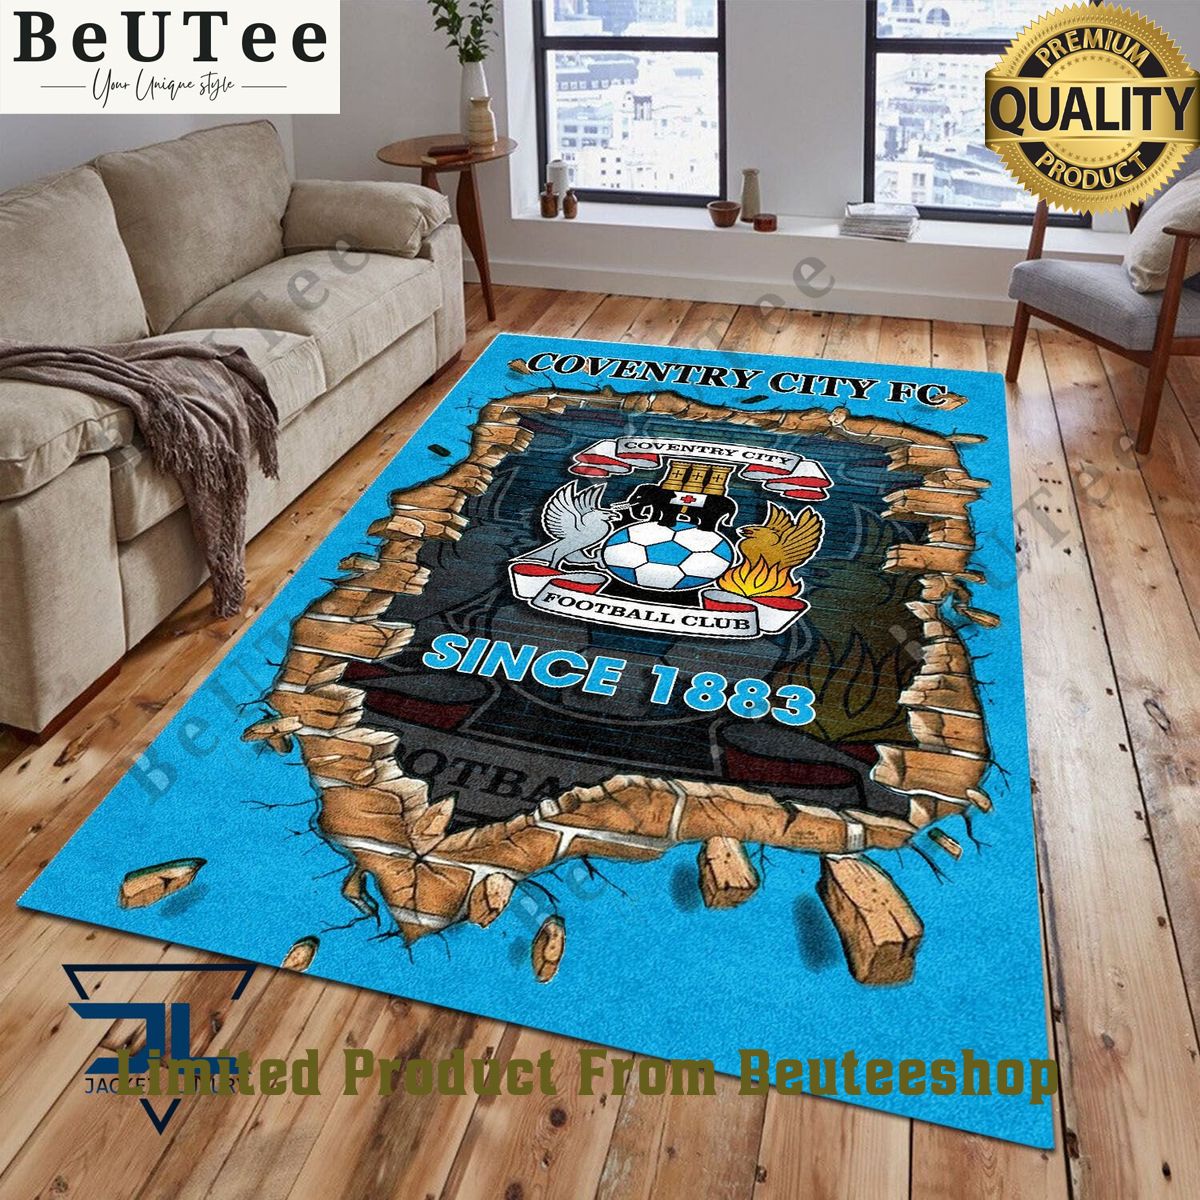 epl coventry city f c 1798 premier league limited rug carpet 1 Gtifw.jpg